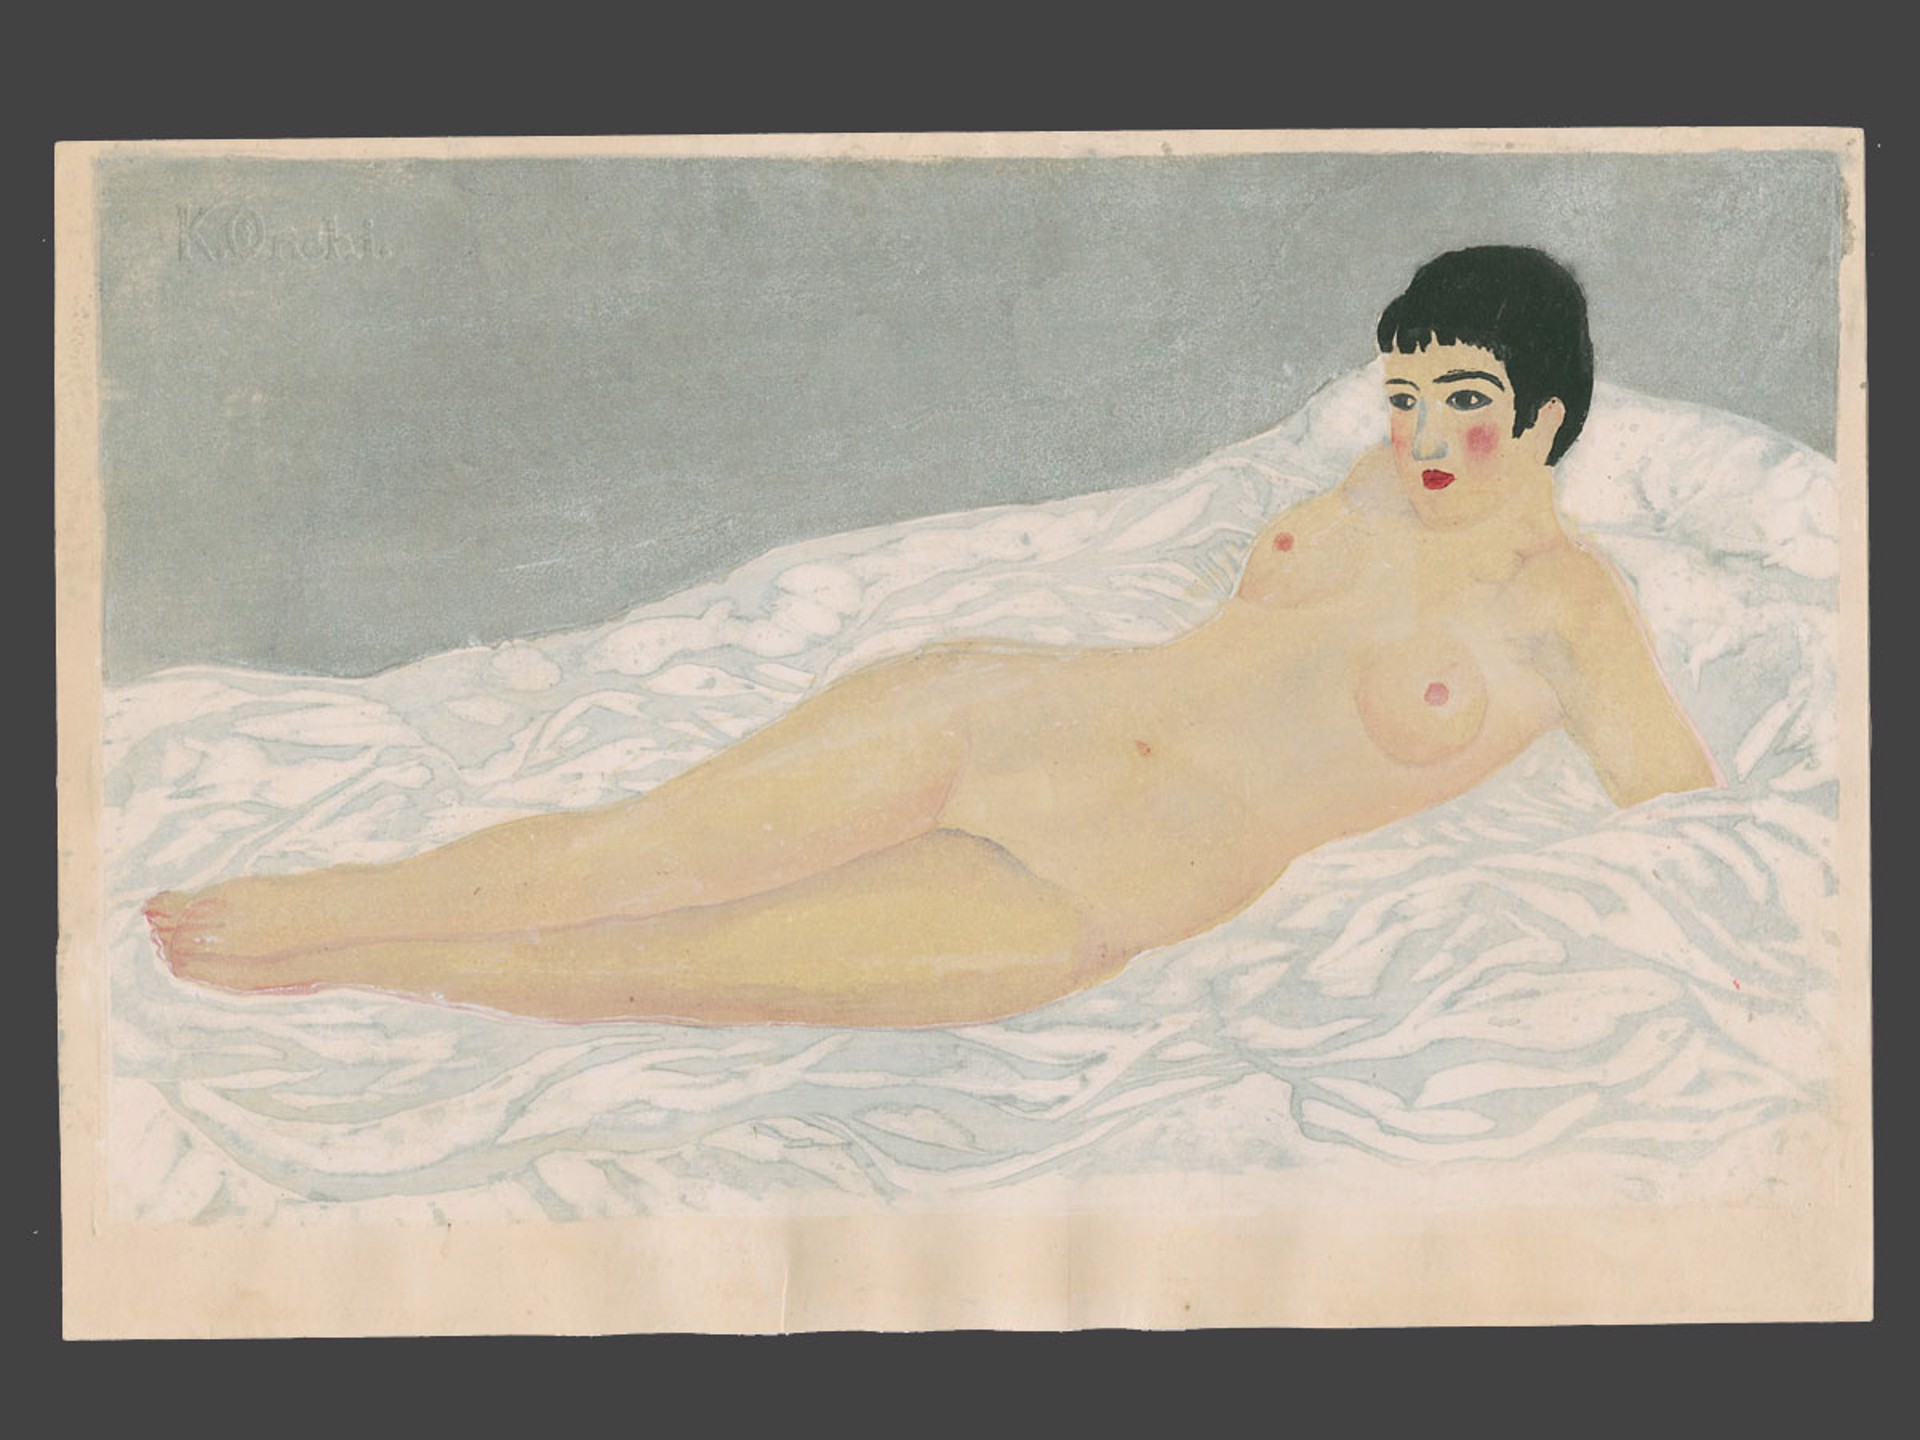 Bare Skin on White Cloth by Onchi